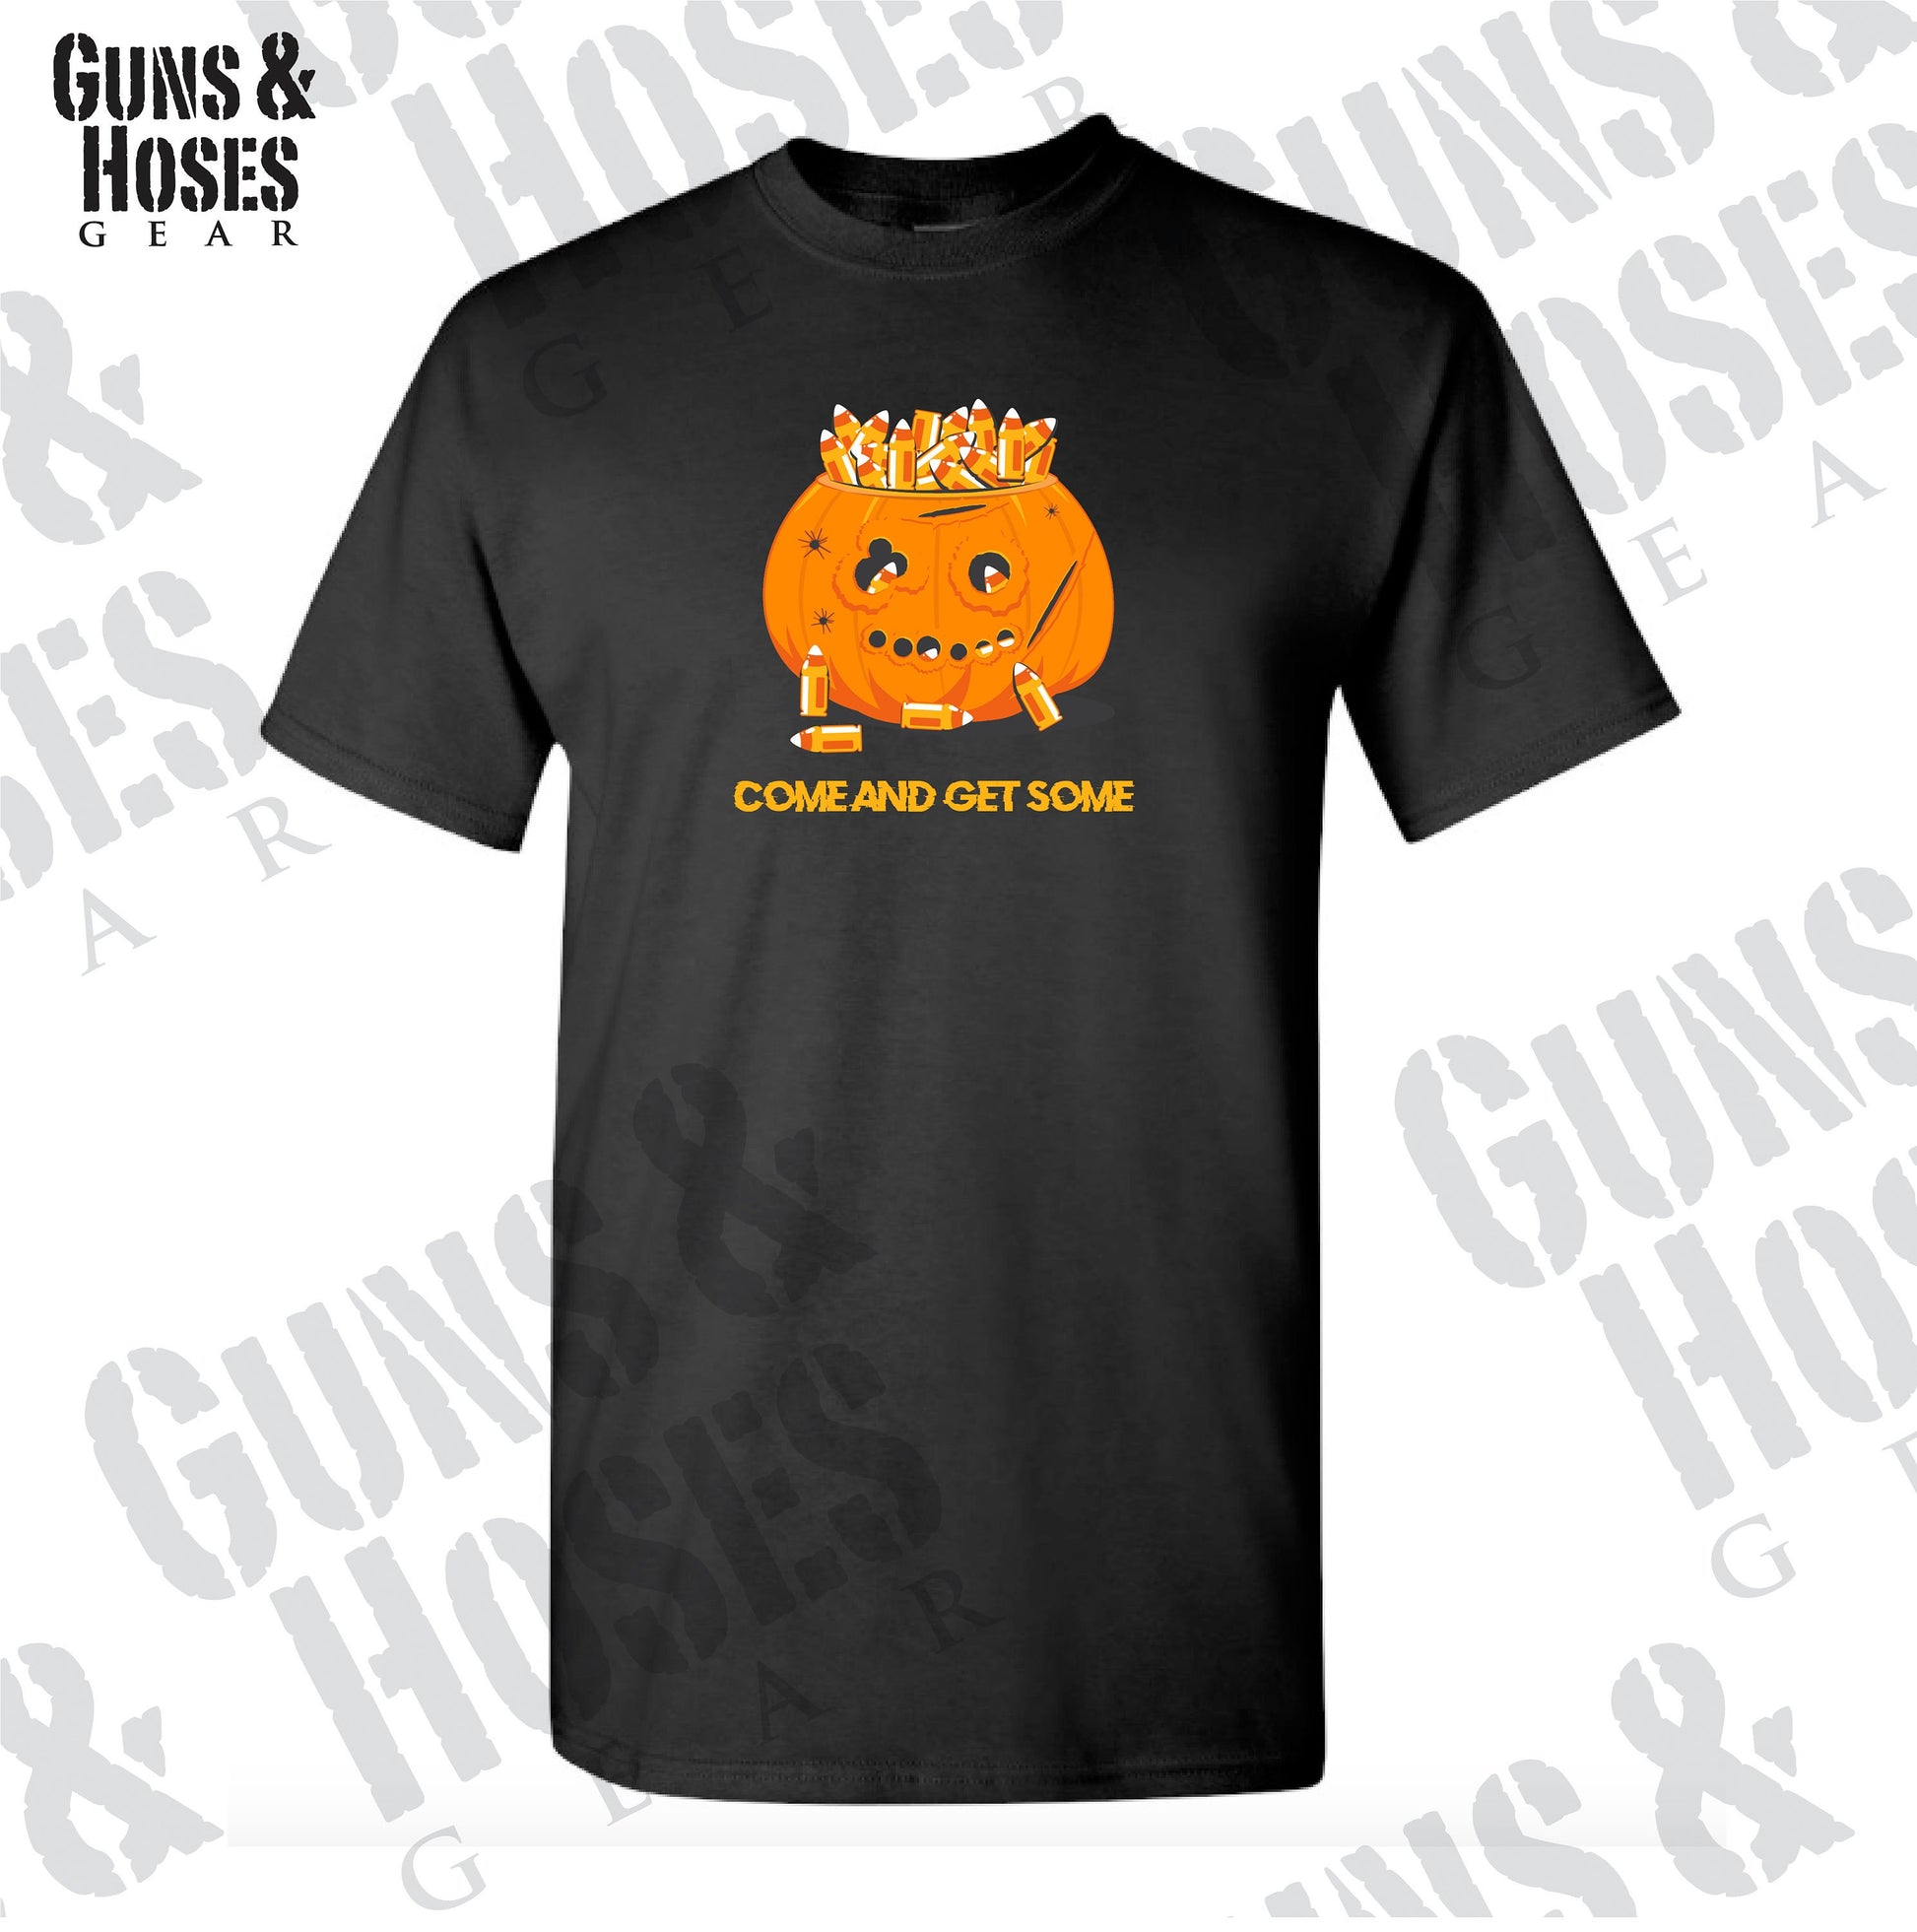 Come and Get Some, Police Halloween T-Shirt